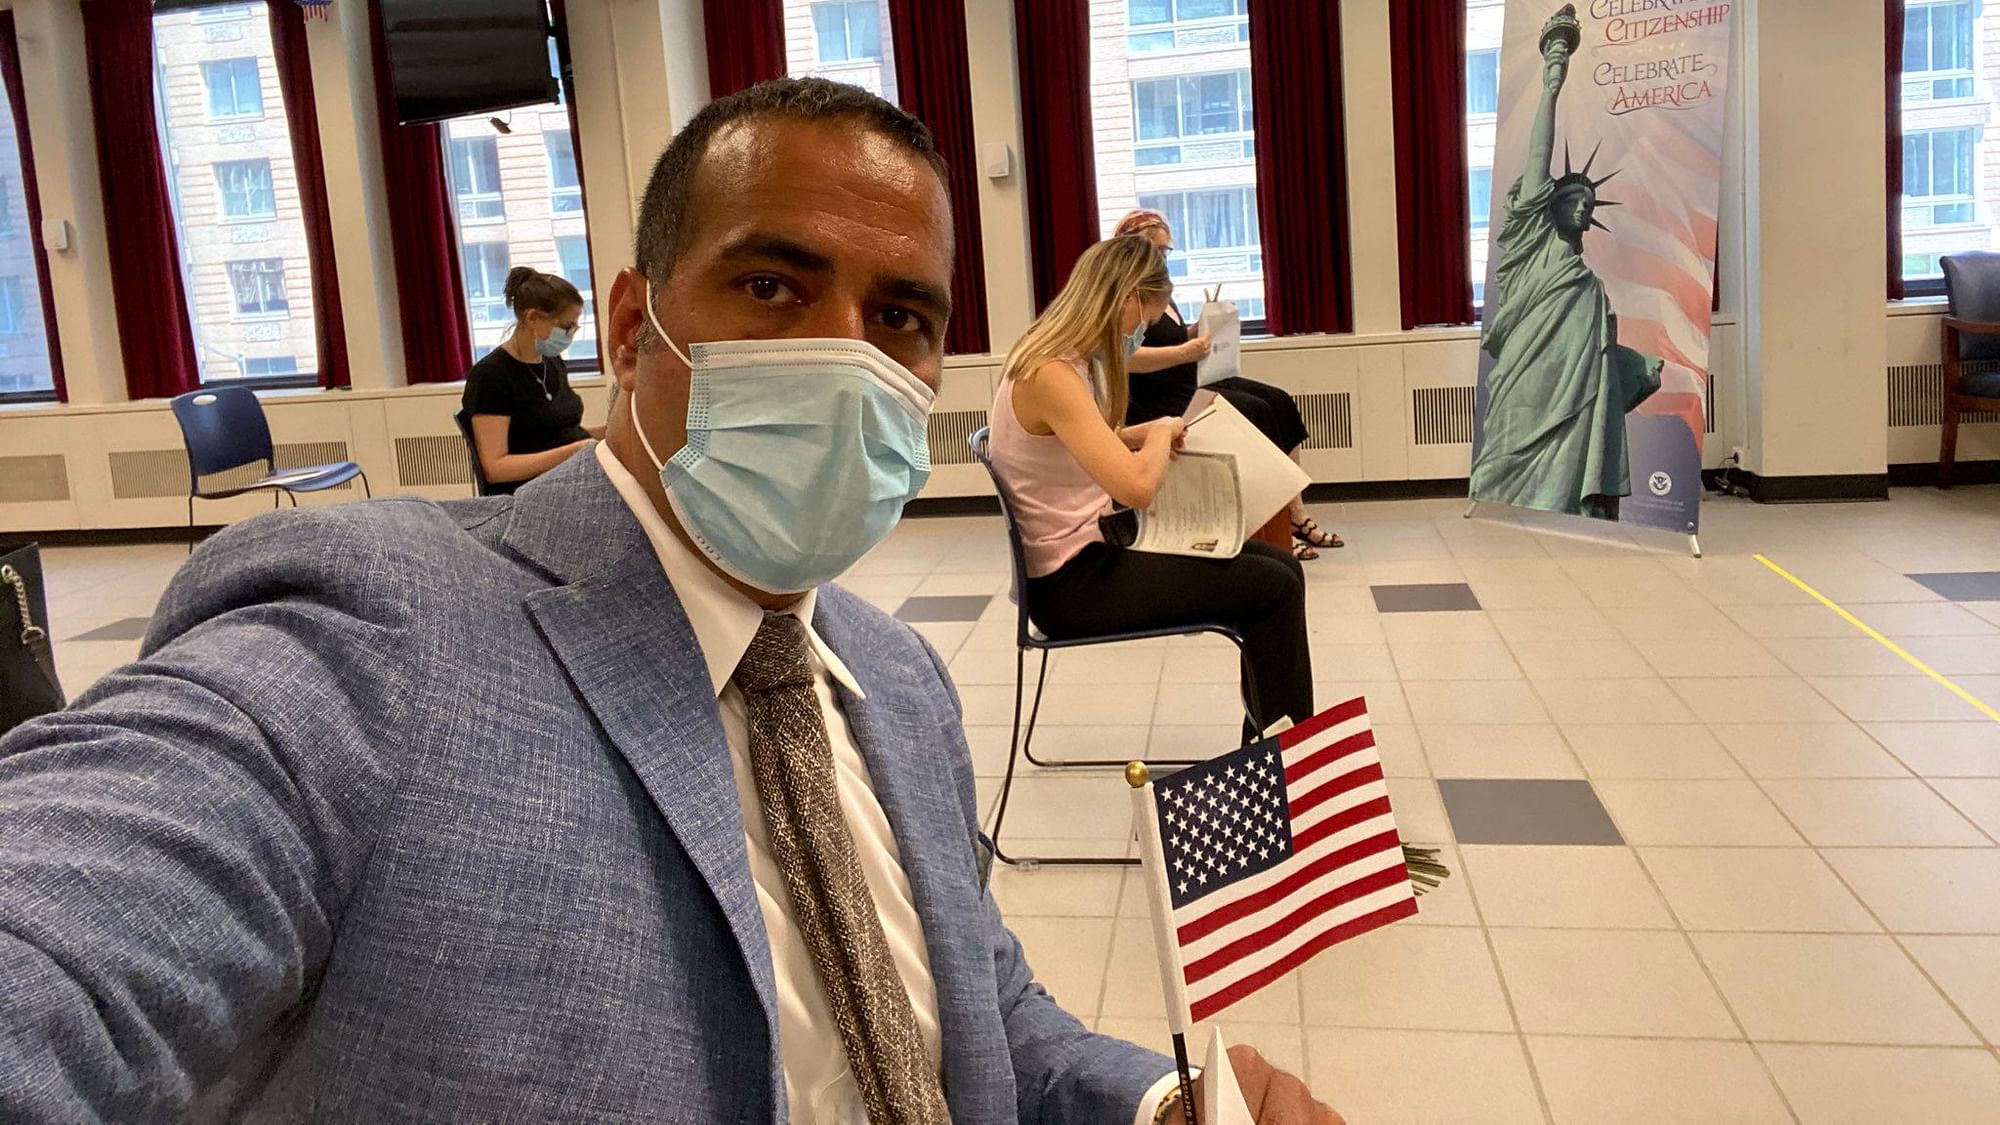 Aatish Taseer, author and columnist, whose Overseas Citizenship of India (OCI) card was revoked in November 2019, became a US citizen on Tuesday, 28 July.